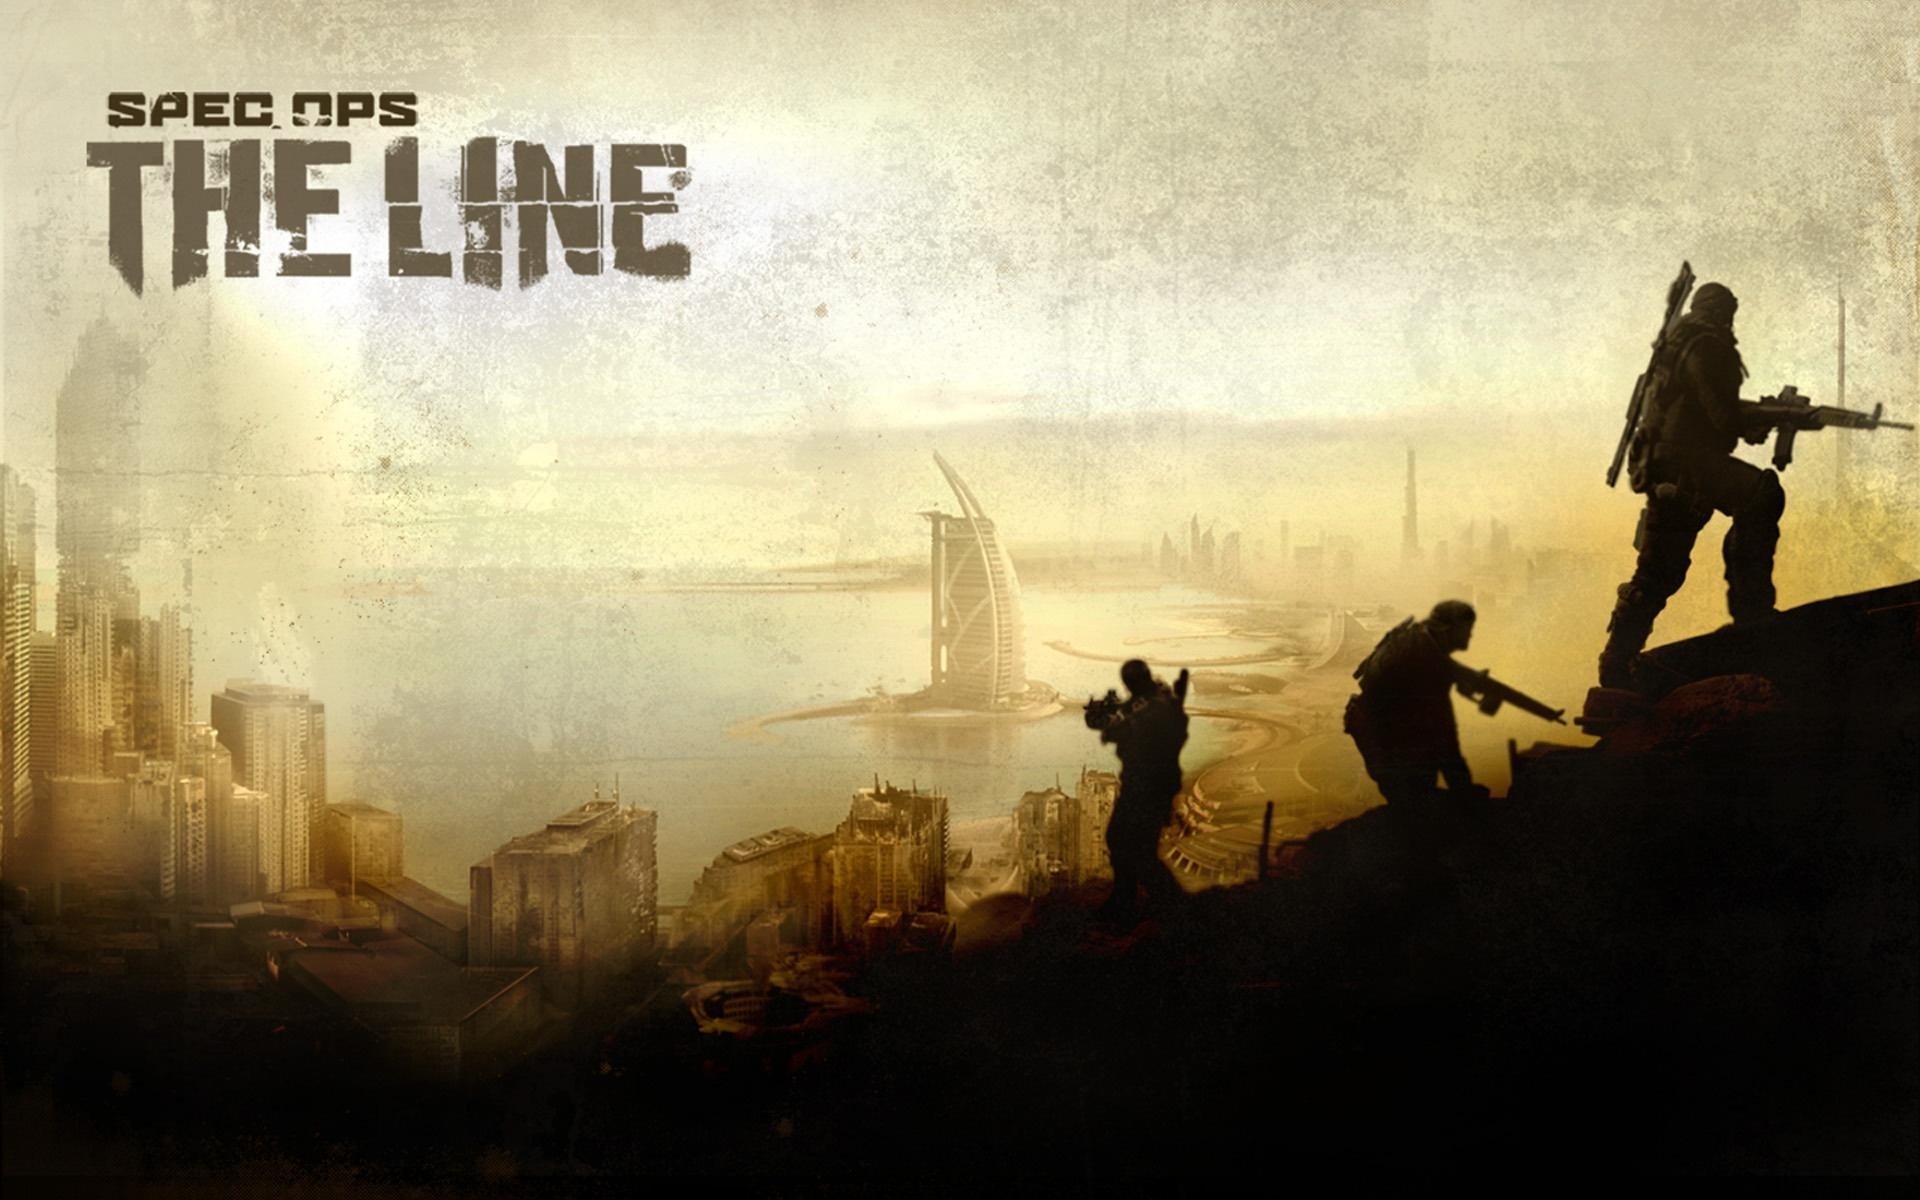 spec_ops_the_line_game-1920x1200.jpg